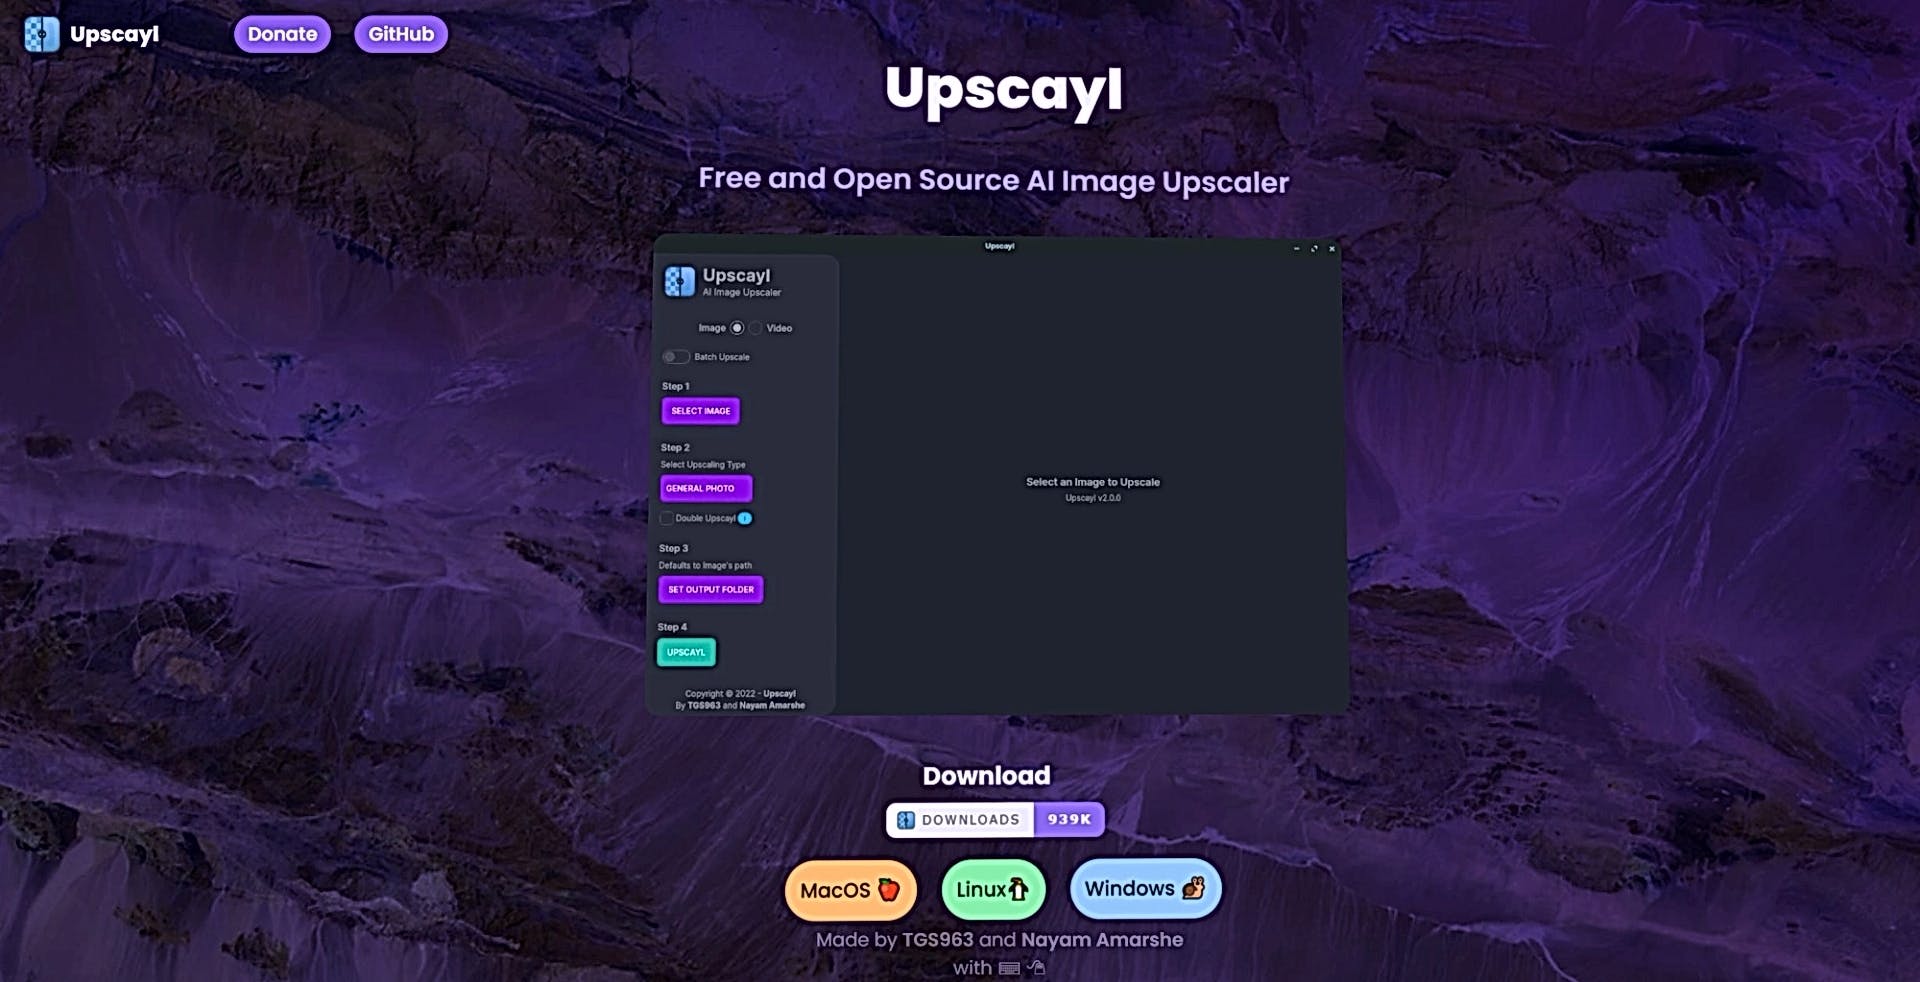 Upscayl featured